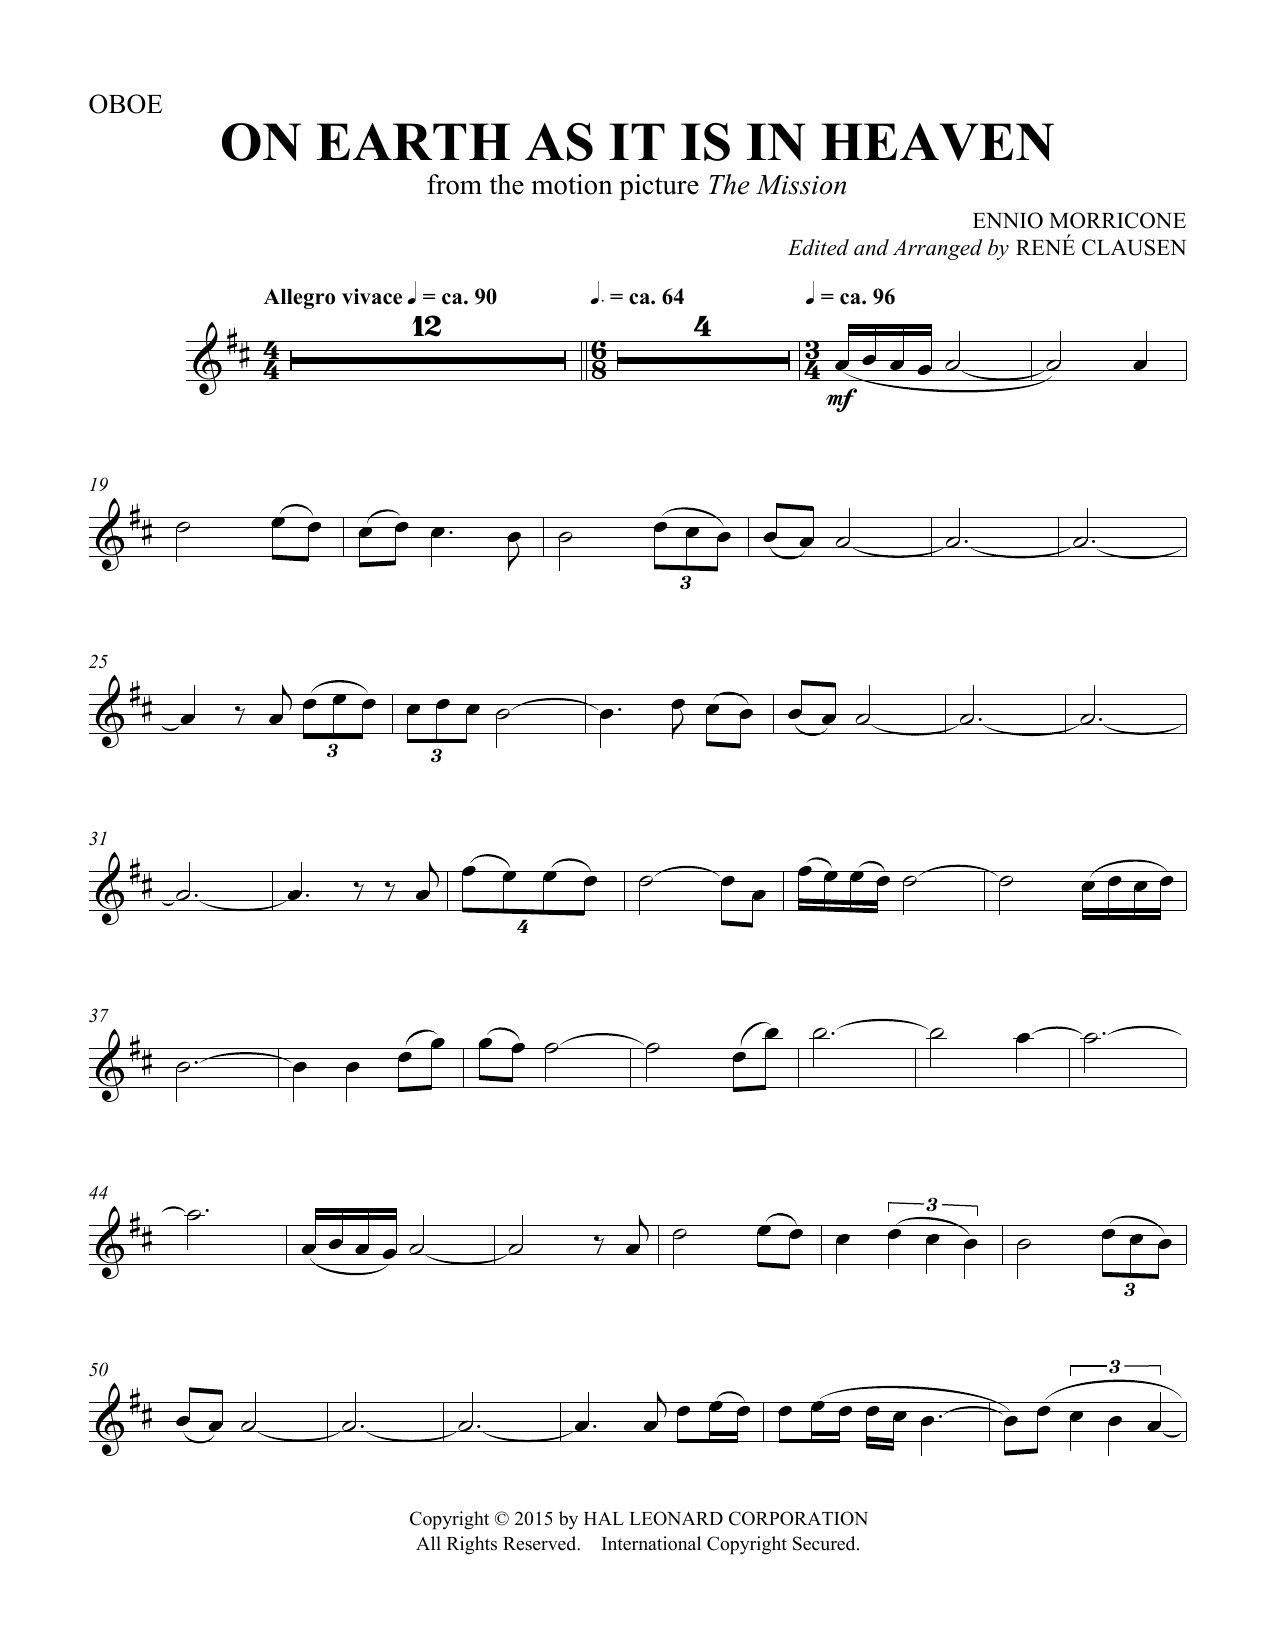 Rene Clausen On Earth As It Is In Heaven - Oboe sheet music notes and chords. Download Printable PDF.